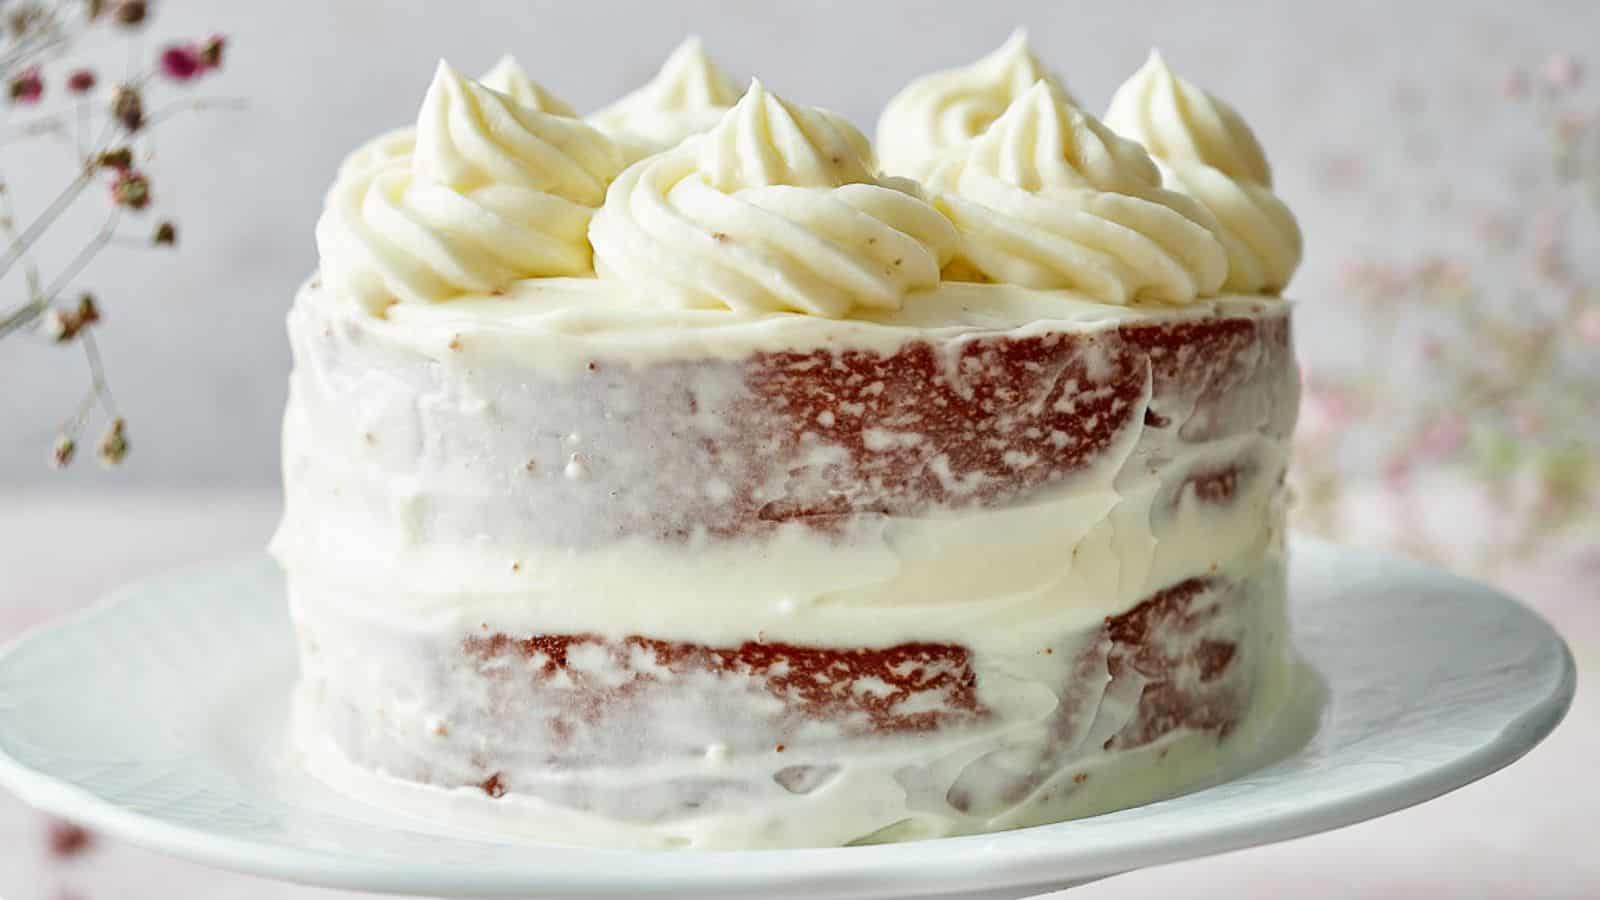 Red Velvet Cake with whipped cream swirls on a cakestand.